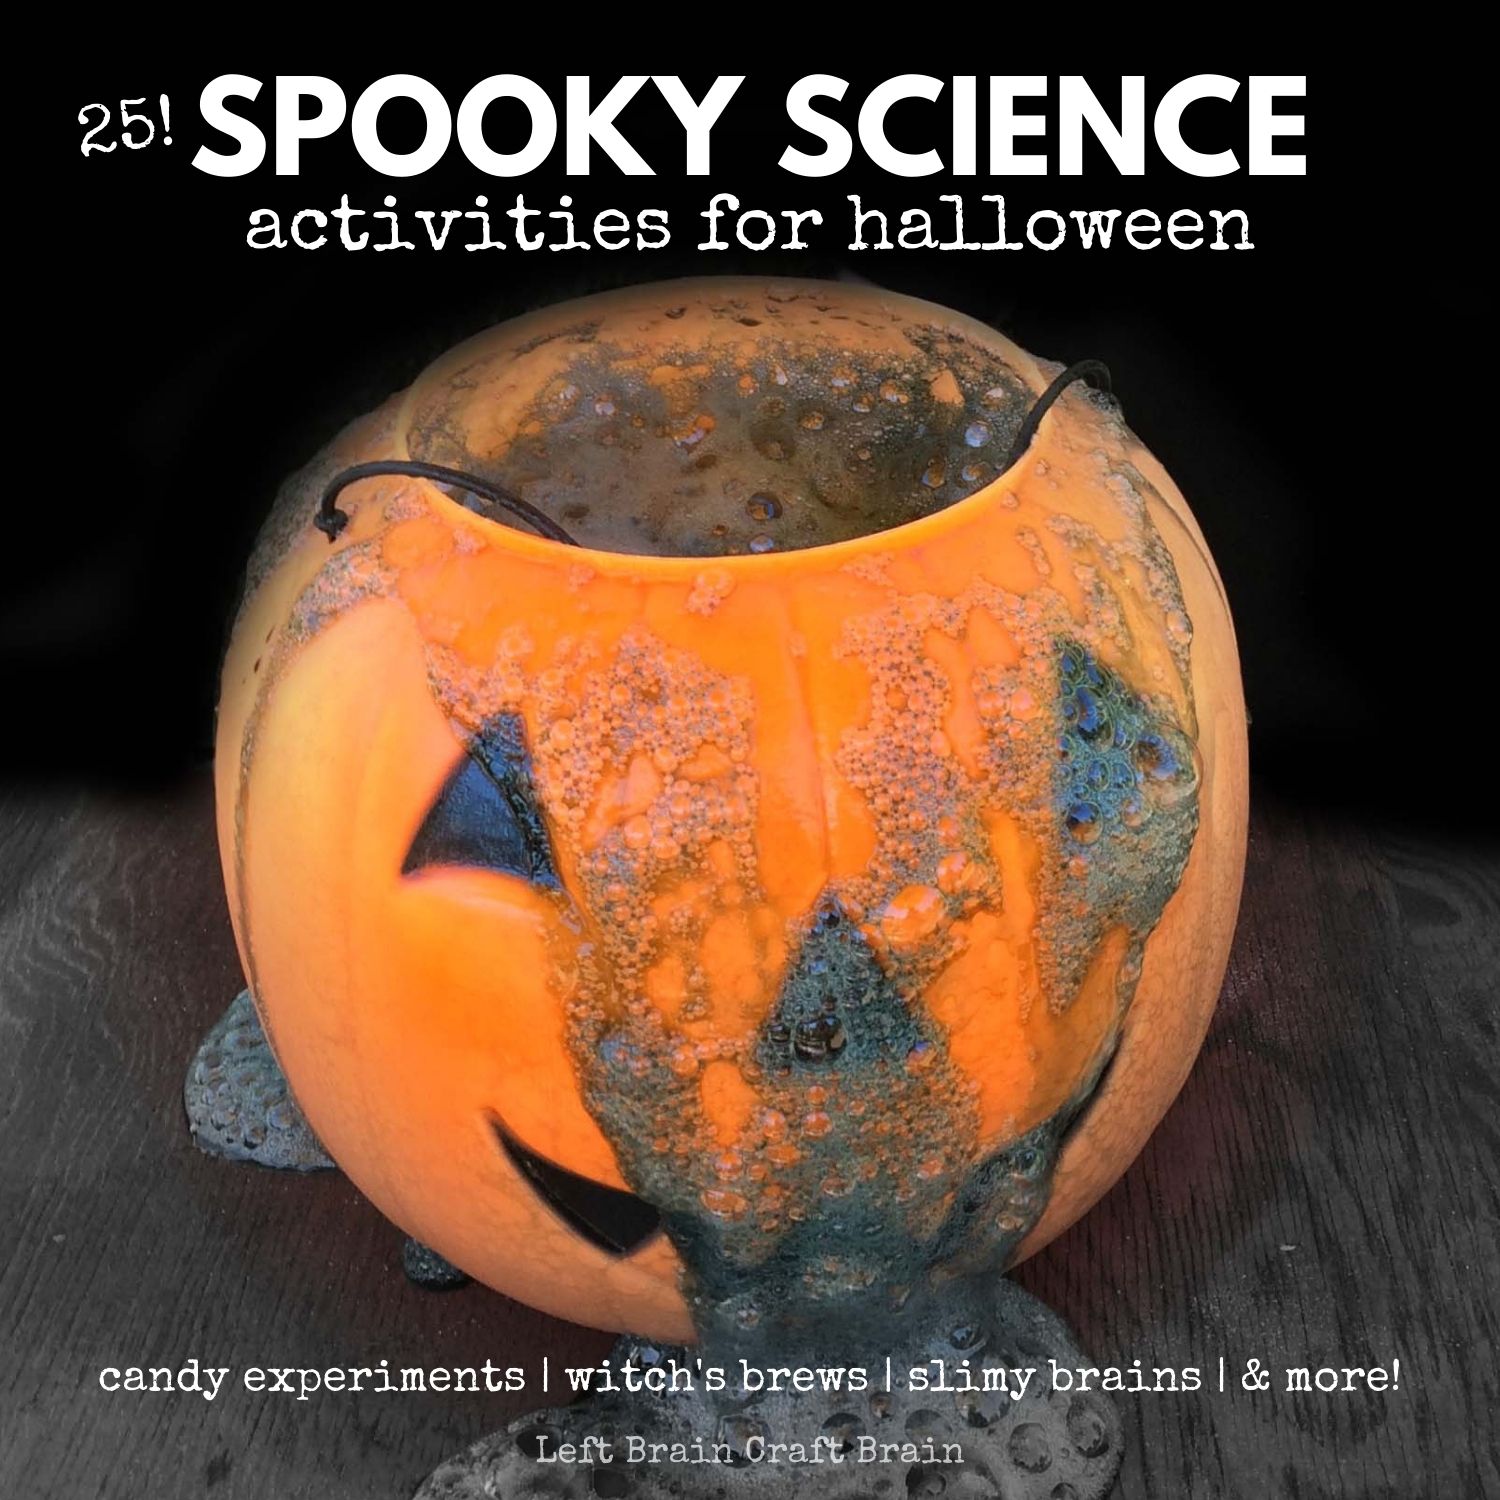 Pumpkins and witches and mad scientists, oh my! It's 25 Spooky Science Activities for Halloween. This huge list of spooky science experiments is perfect for parties or just after school fun for the kids.